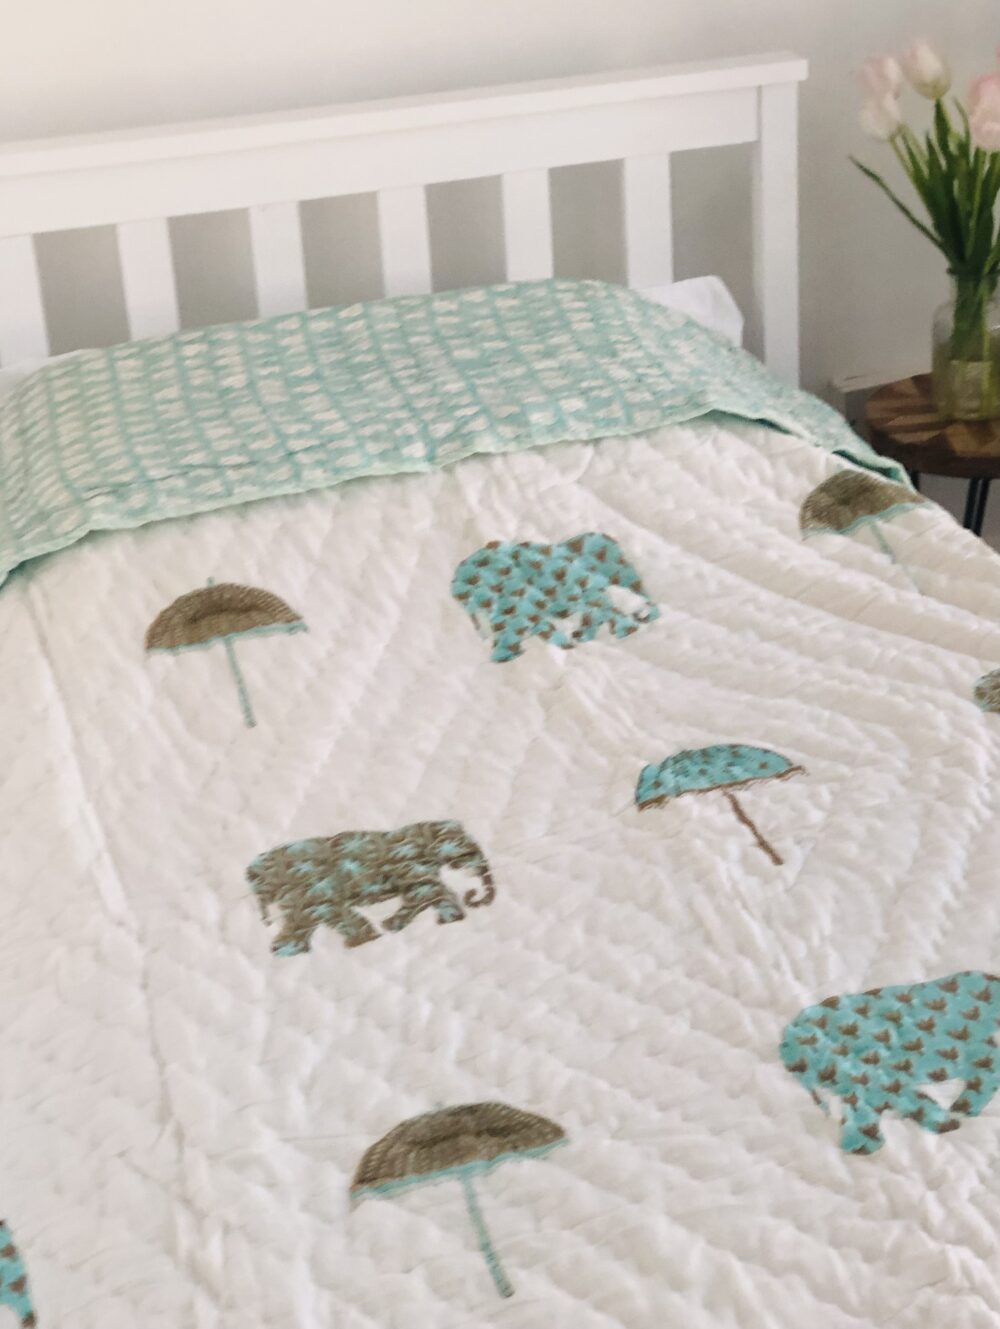 *indian block print quilt with elephants and umbrellas